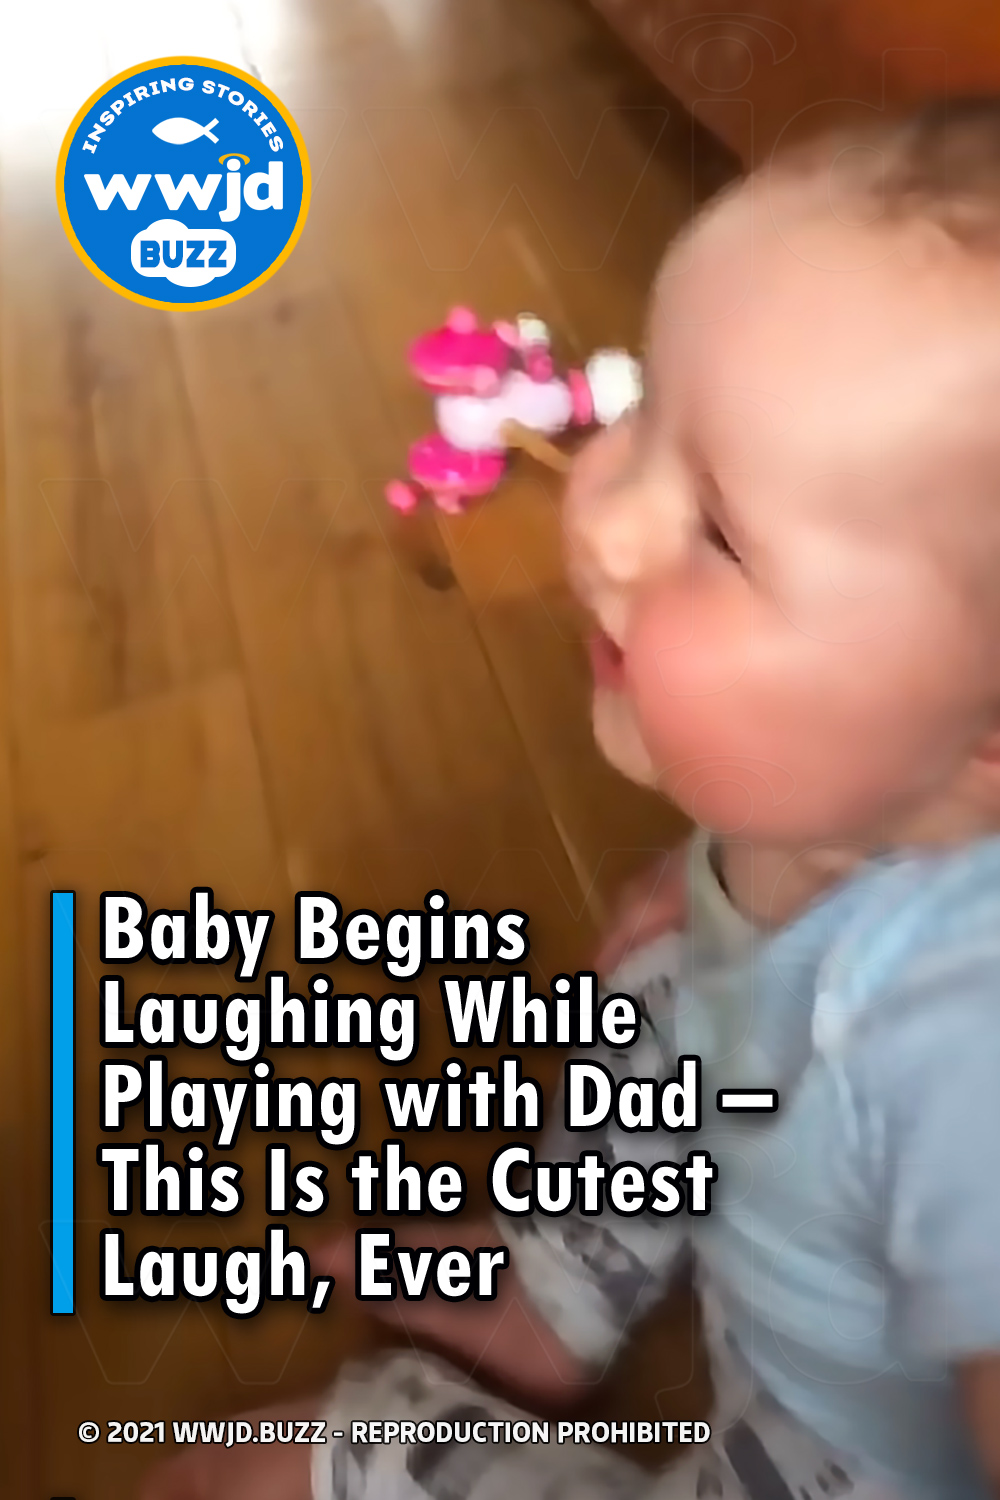 Baby Begins Laughing While Playing with Dad – This Is the Cutest Laugh, Ever